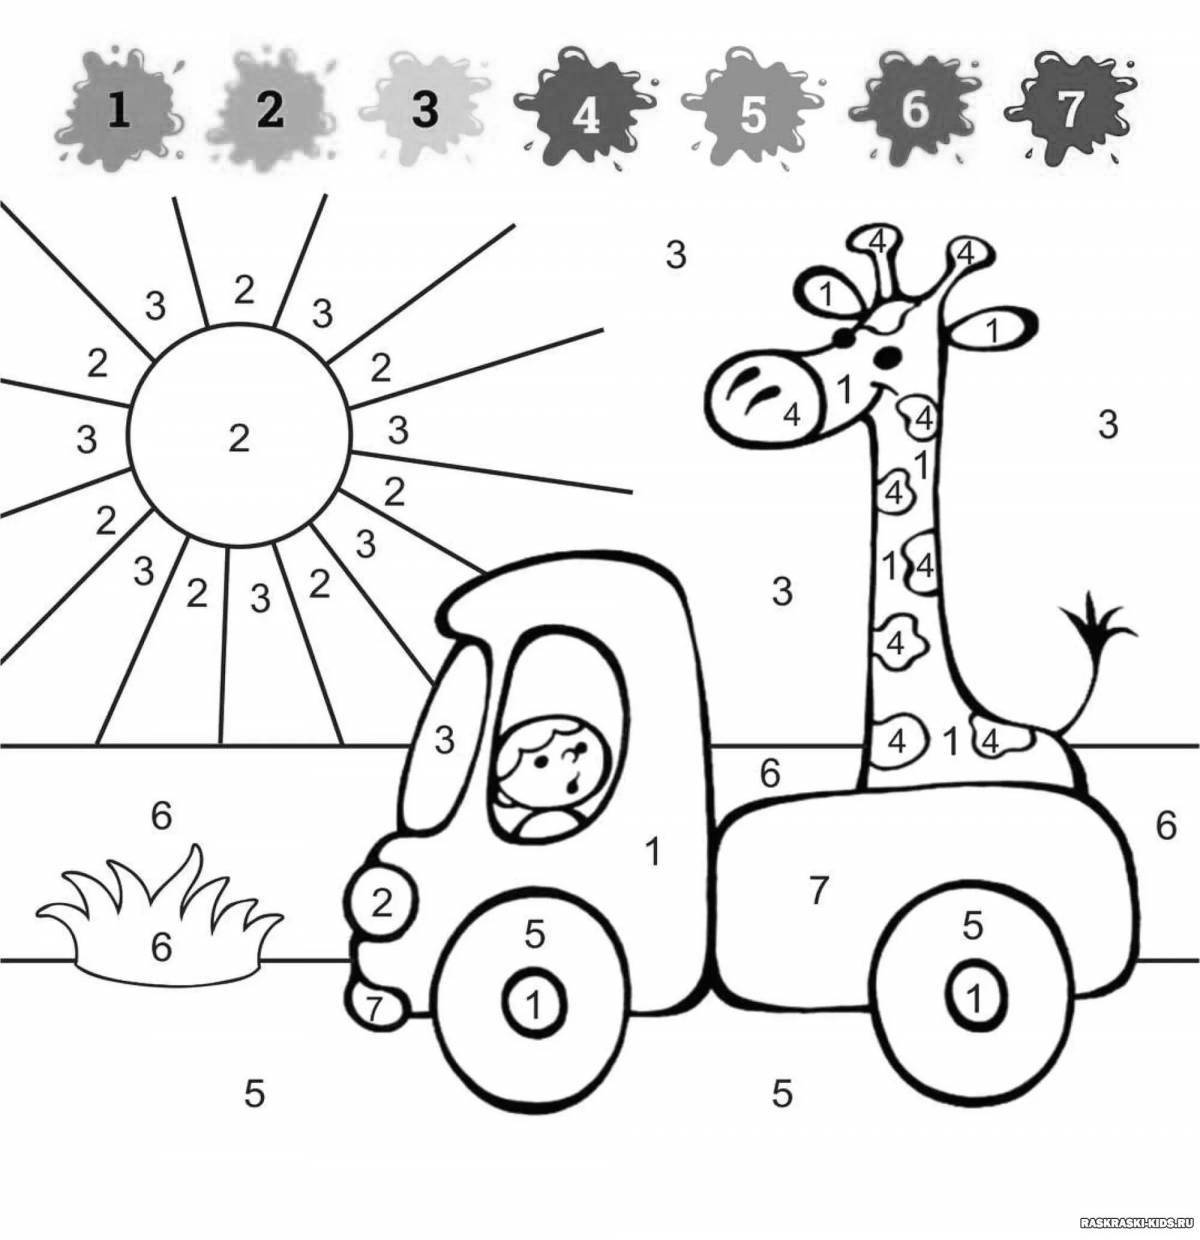 Innovative coloring book for boys 4 years old, developing